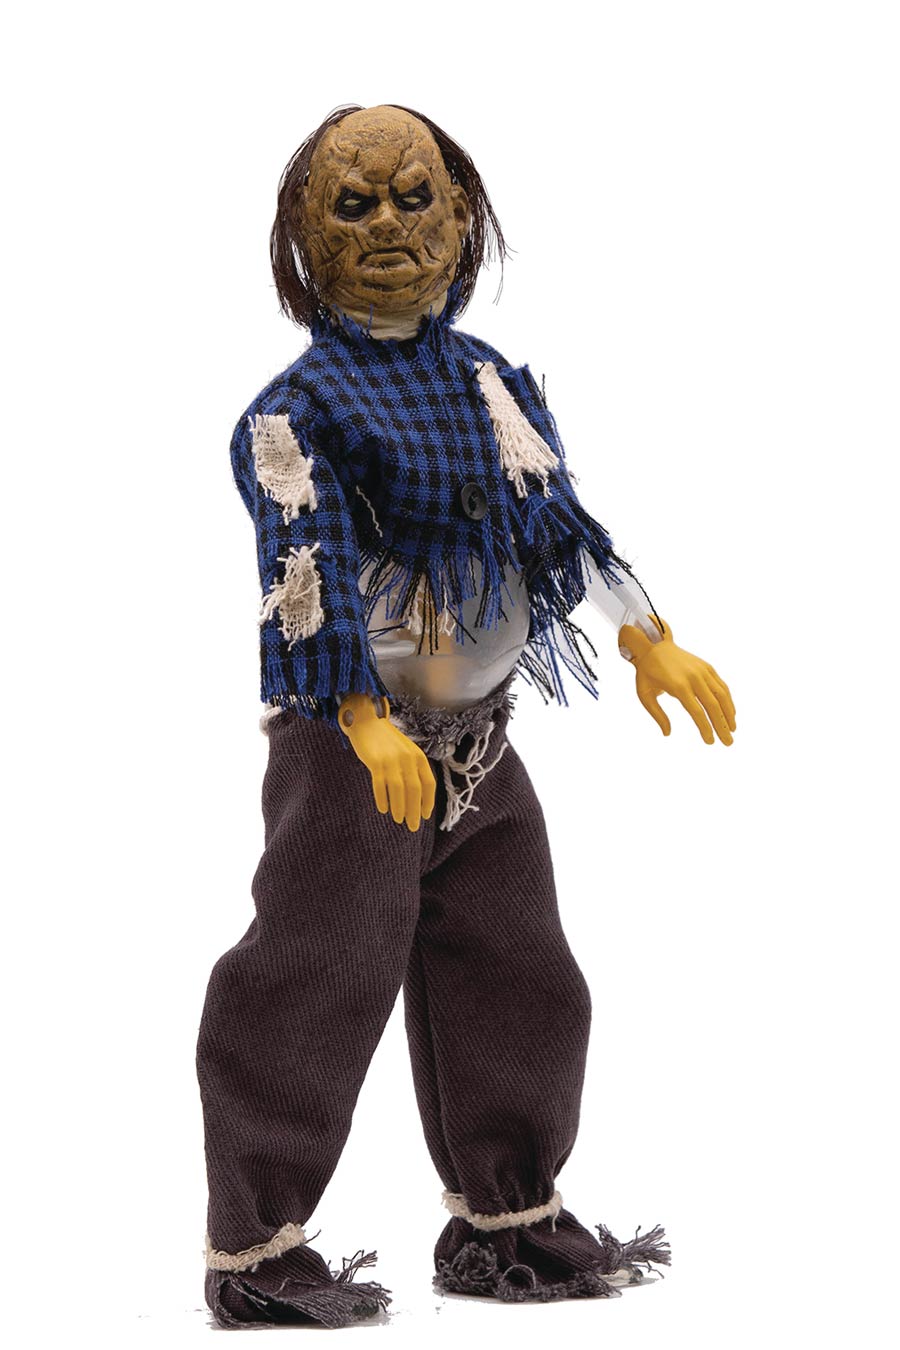 Mego Horror 8-Inch Action Figure - Scary Stories Harold Scarecrow